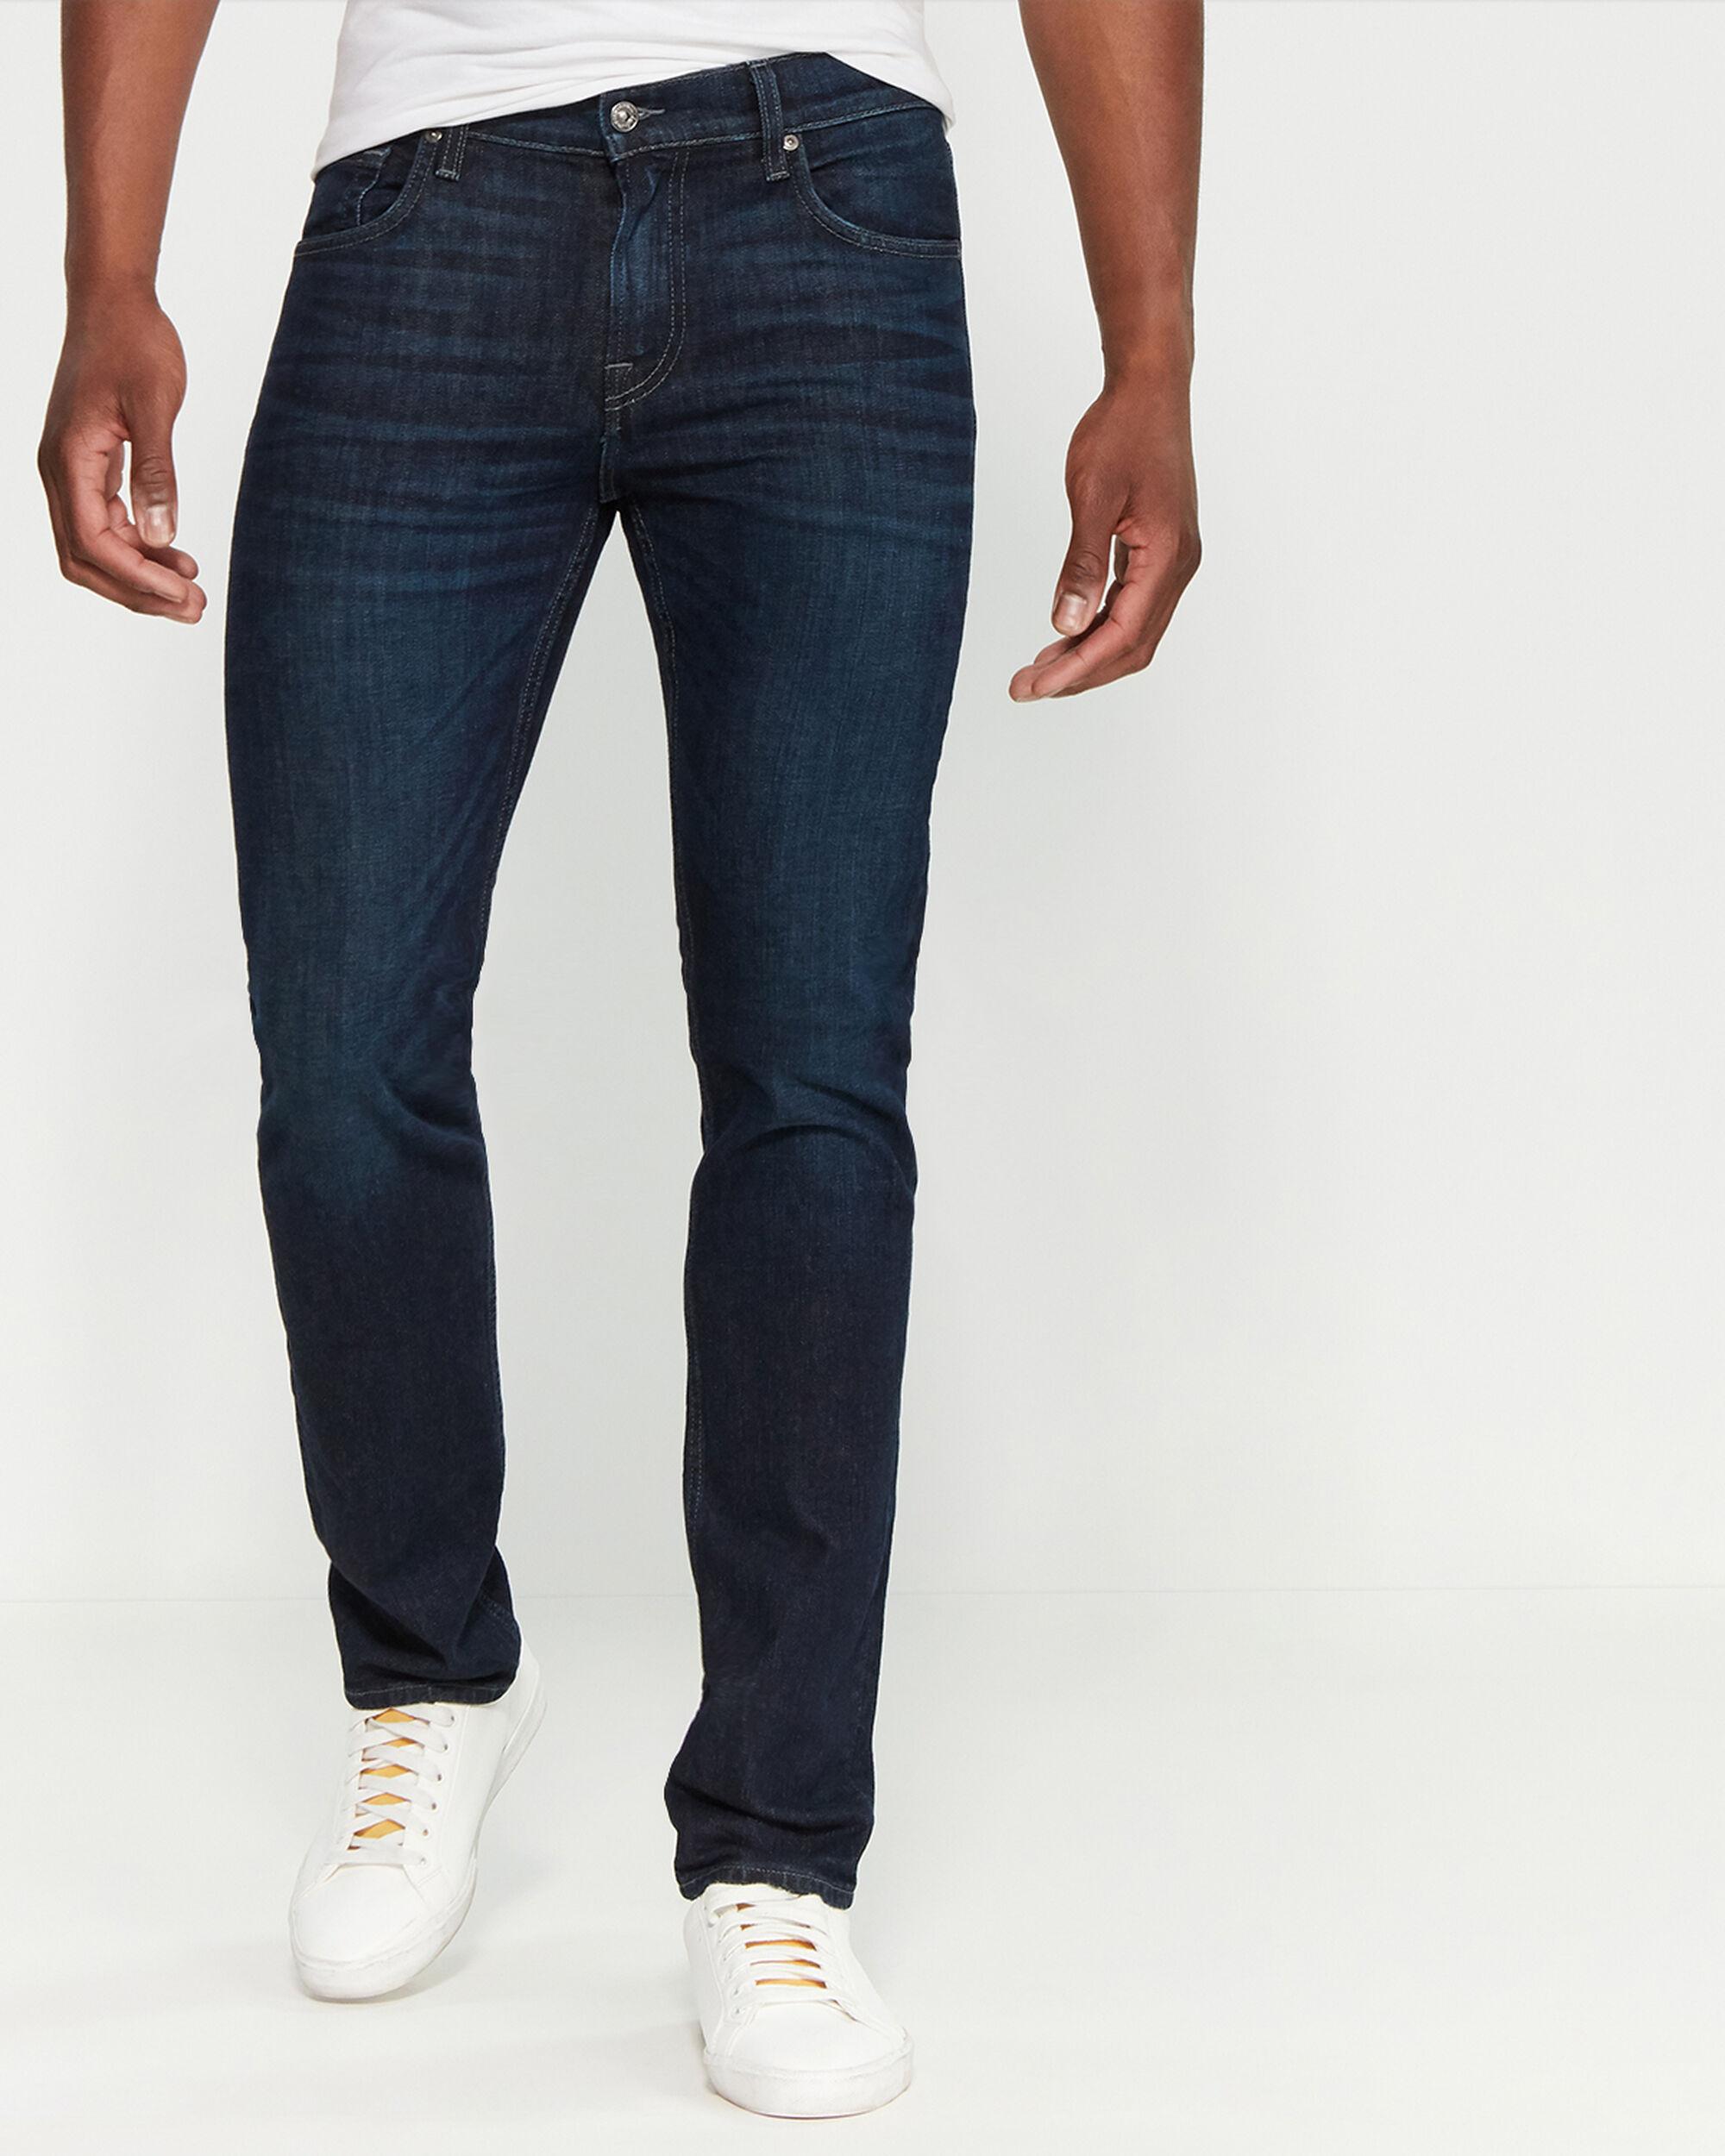 7 For All Mankind Denim Slimmy Squiggle Jeans in Blue for Men - Lyst